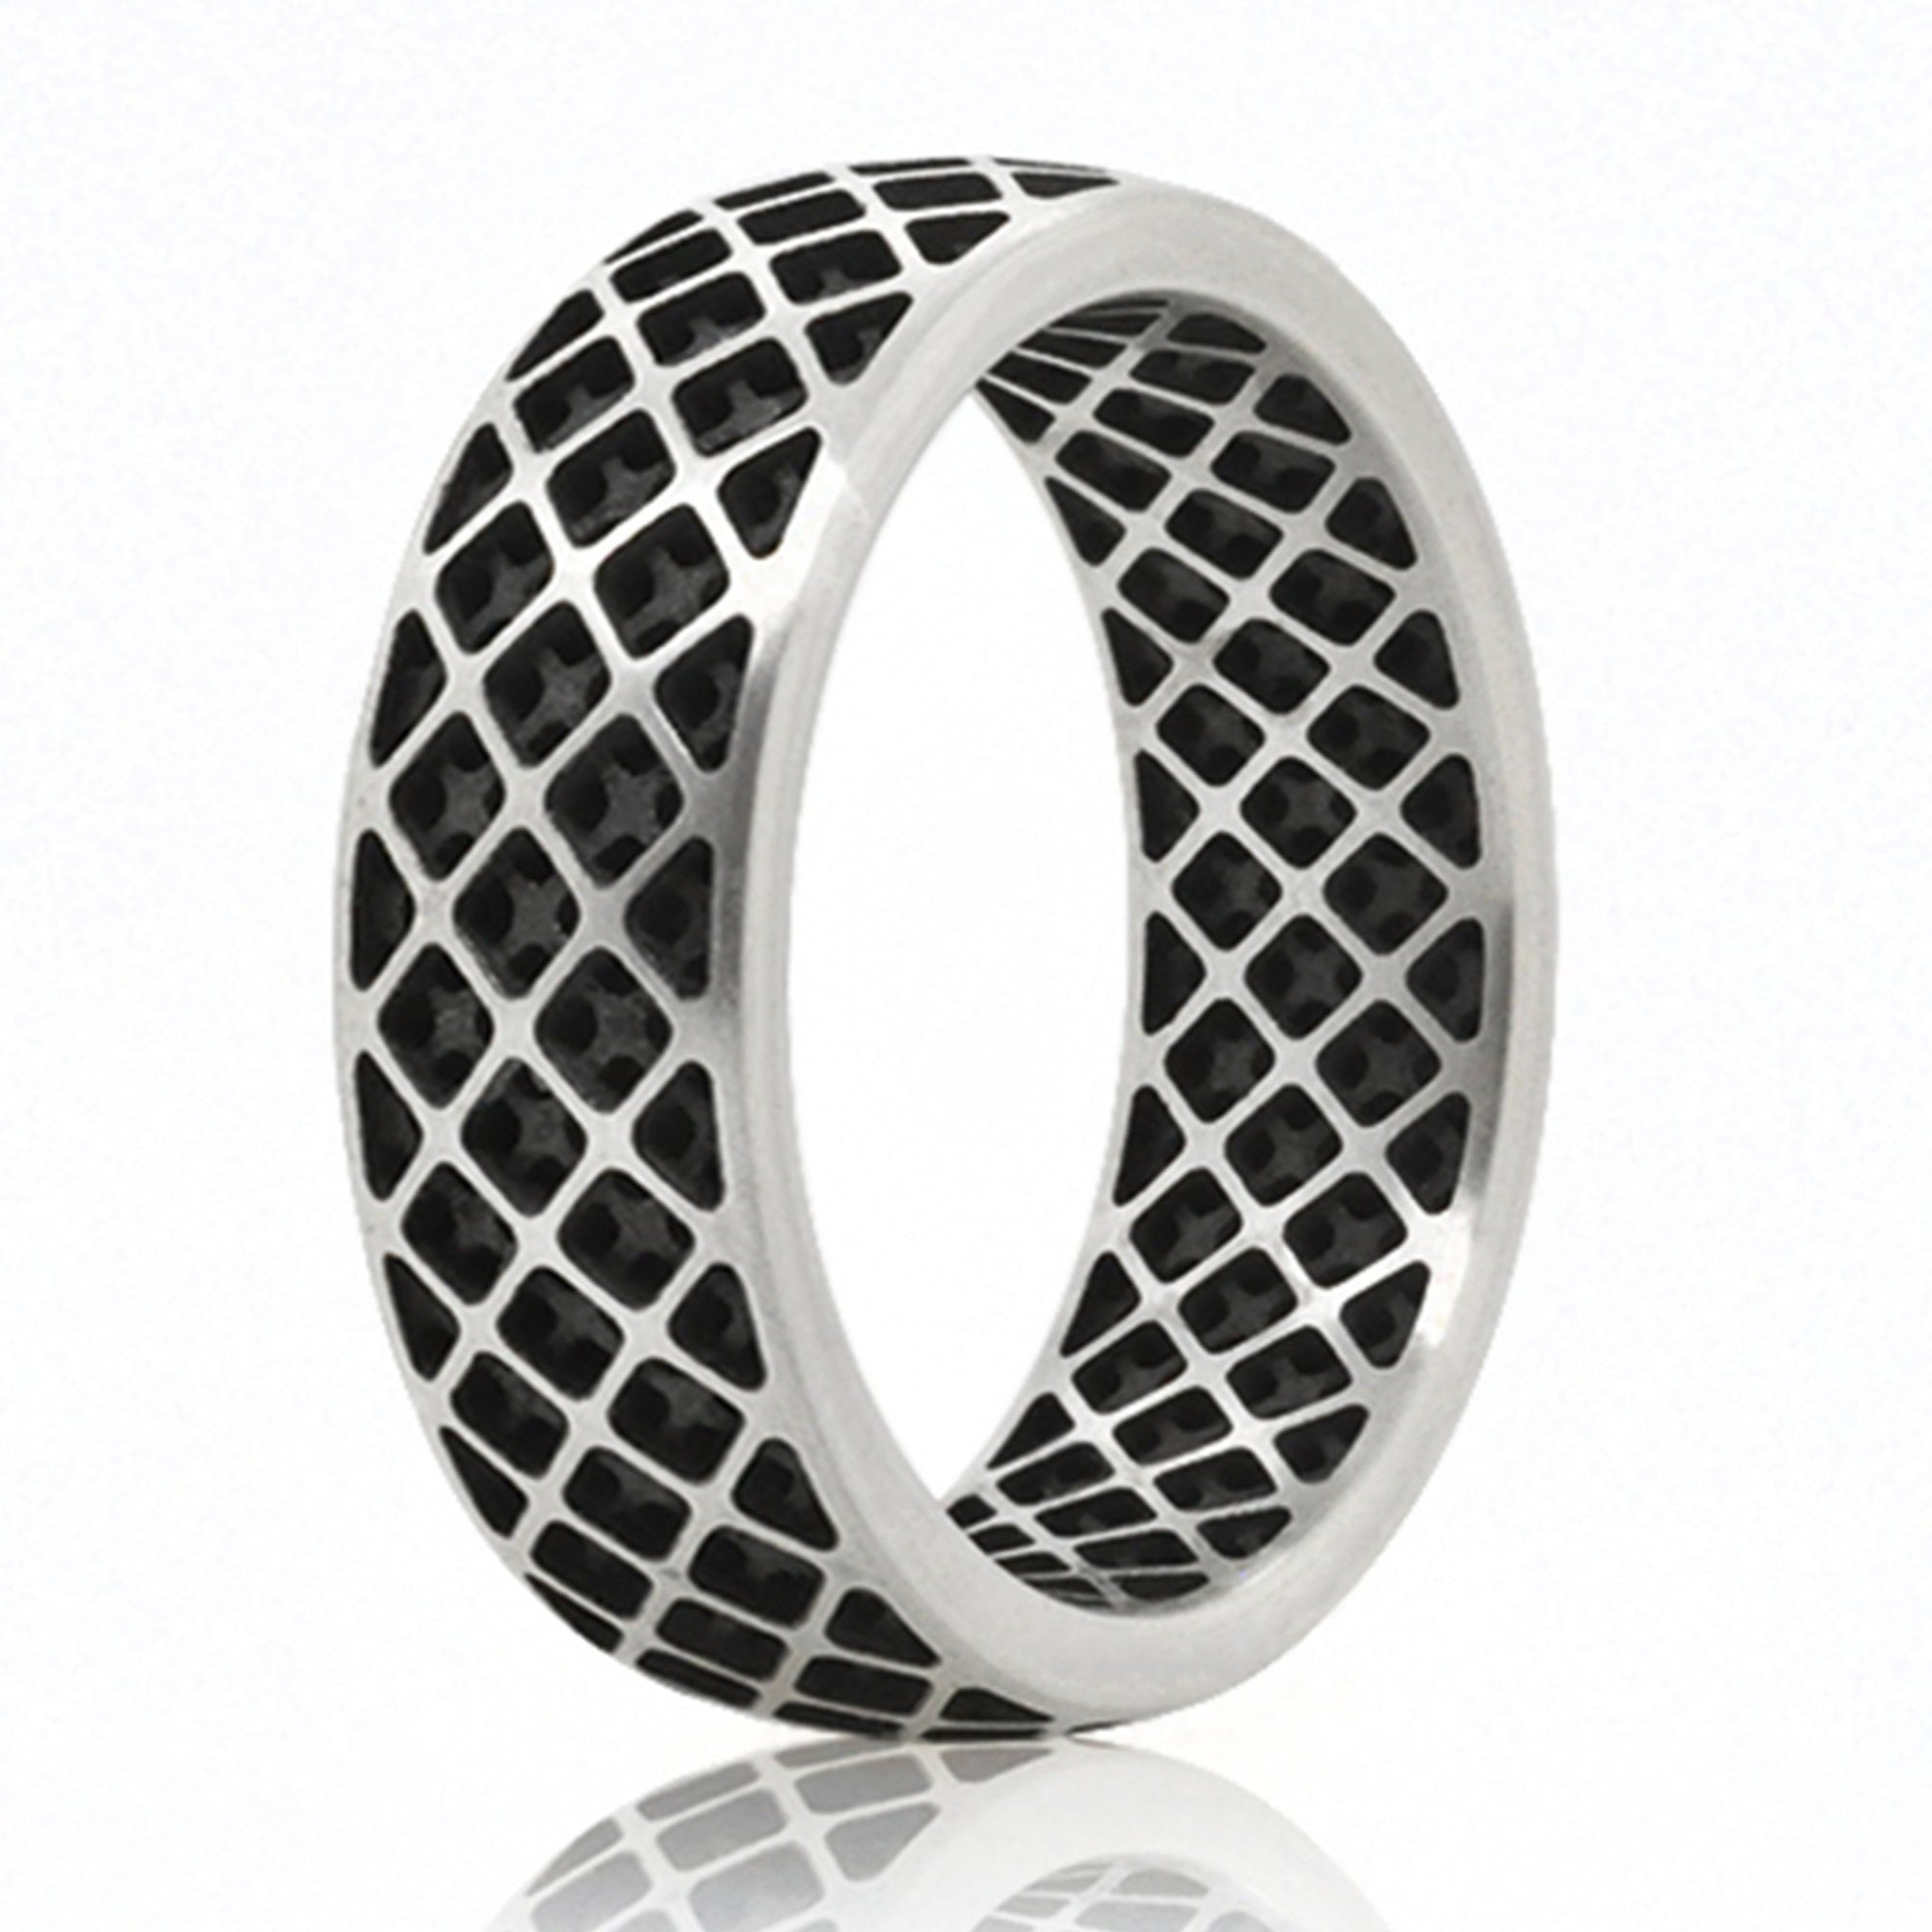 Sterling Silver ring featuring a square-based grid pattern and blackened interior.